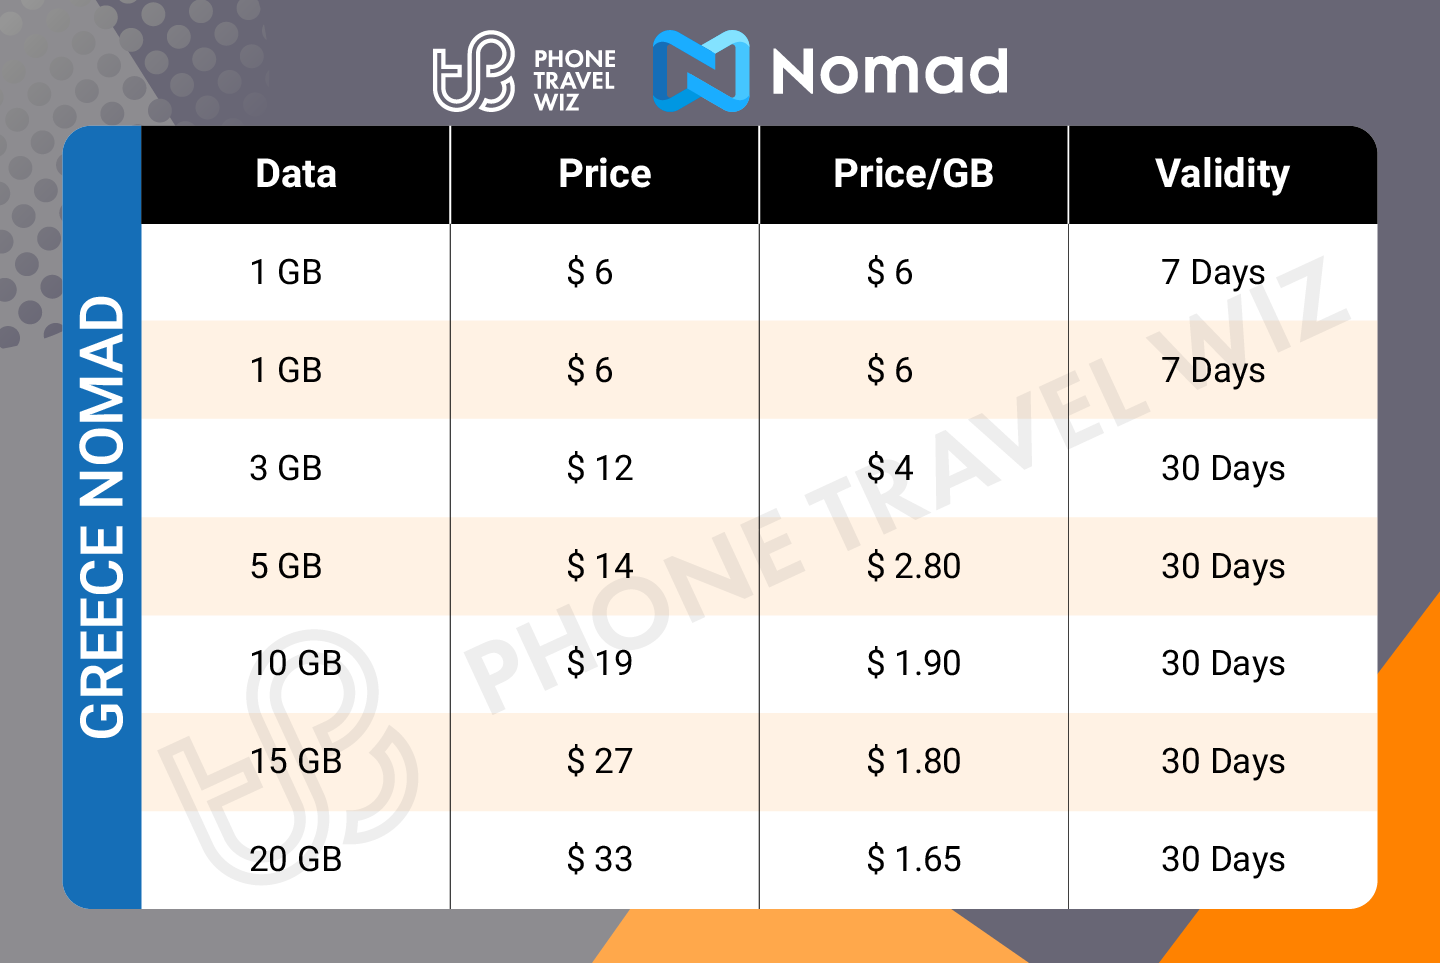 Nomad Greece eSIM Price & Data Details Infographic by Phone Travel Wiz